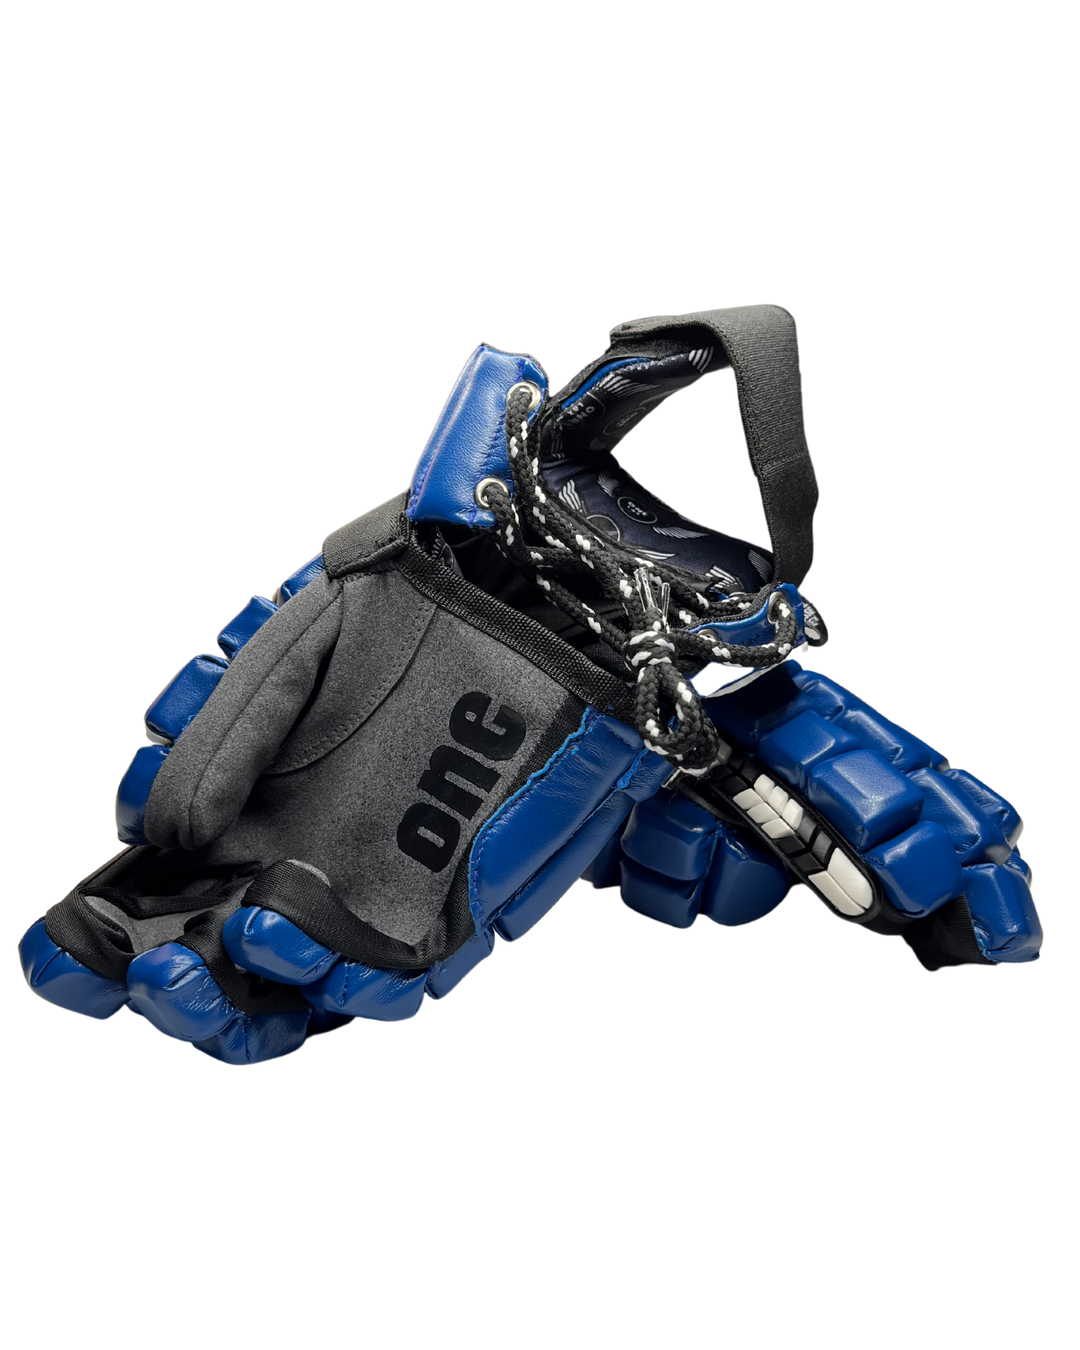 JR. 1 Gloves in Blue | 2 Kids Sizes Available | HYBRID Box & Field Lacrosse Gloves - One Lax